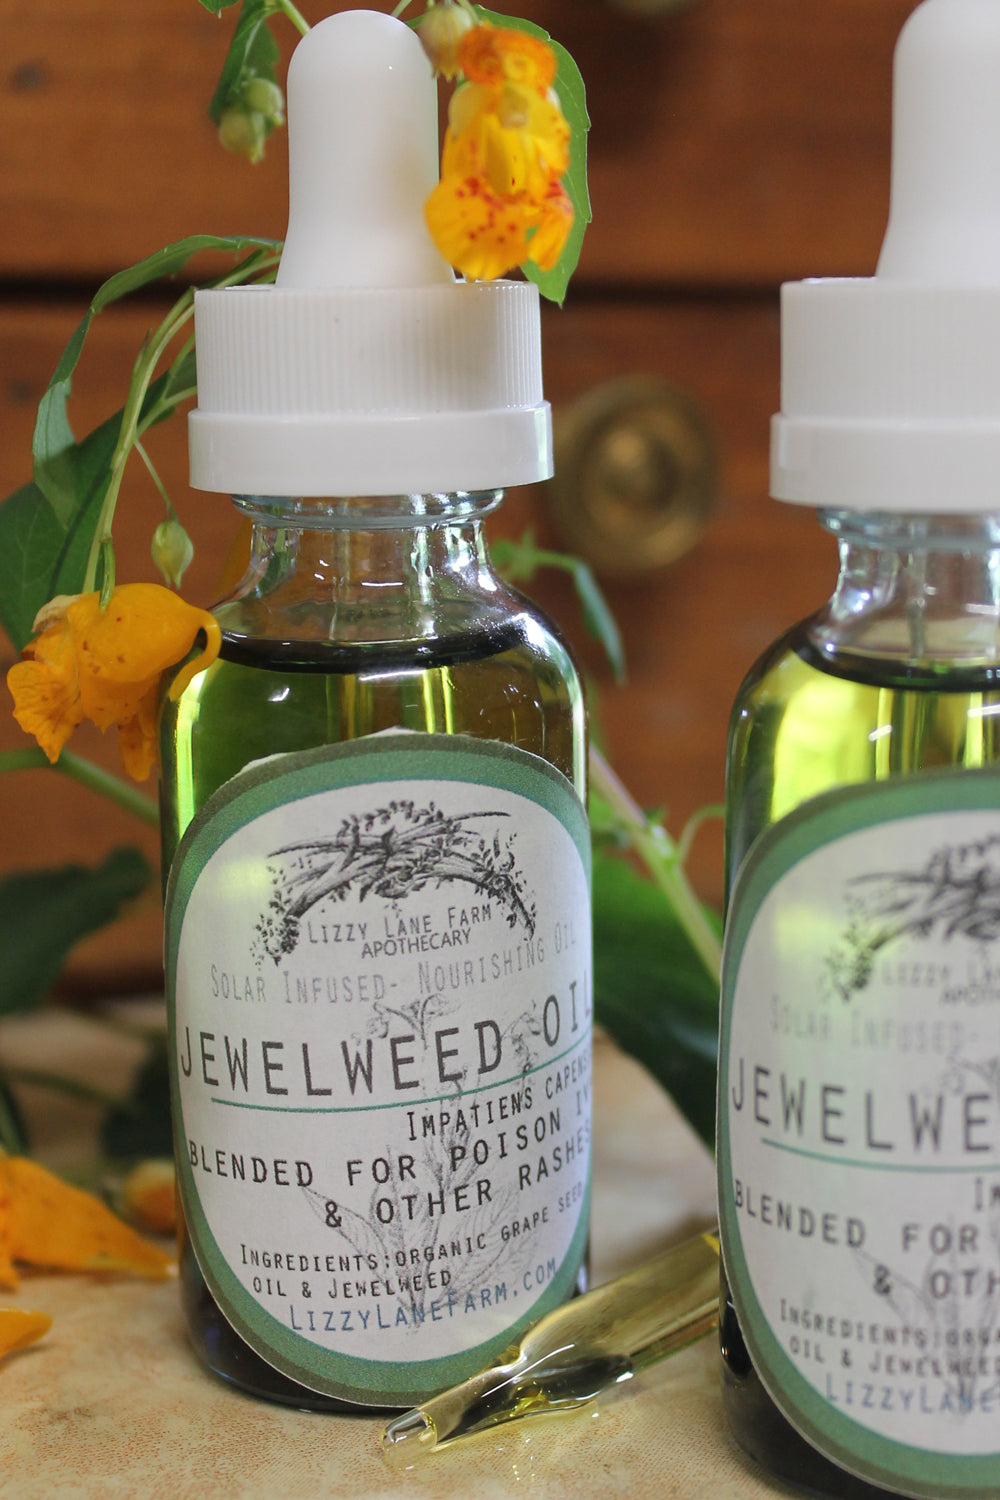 Jewelweed Herbal Oil - Lizzy Lane Farm Apothecary